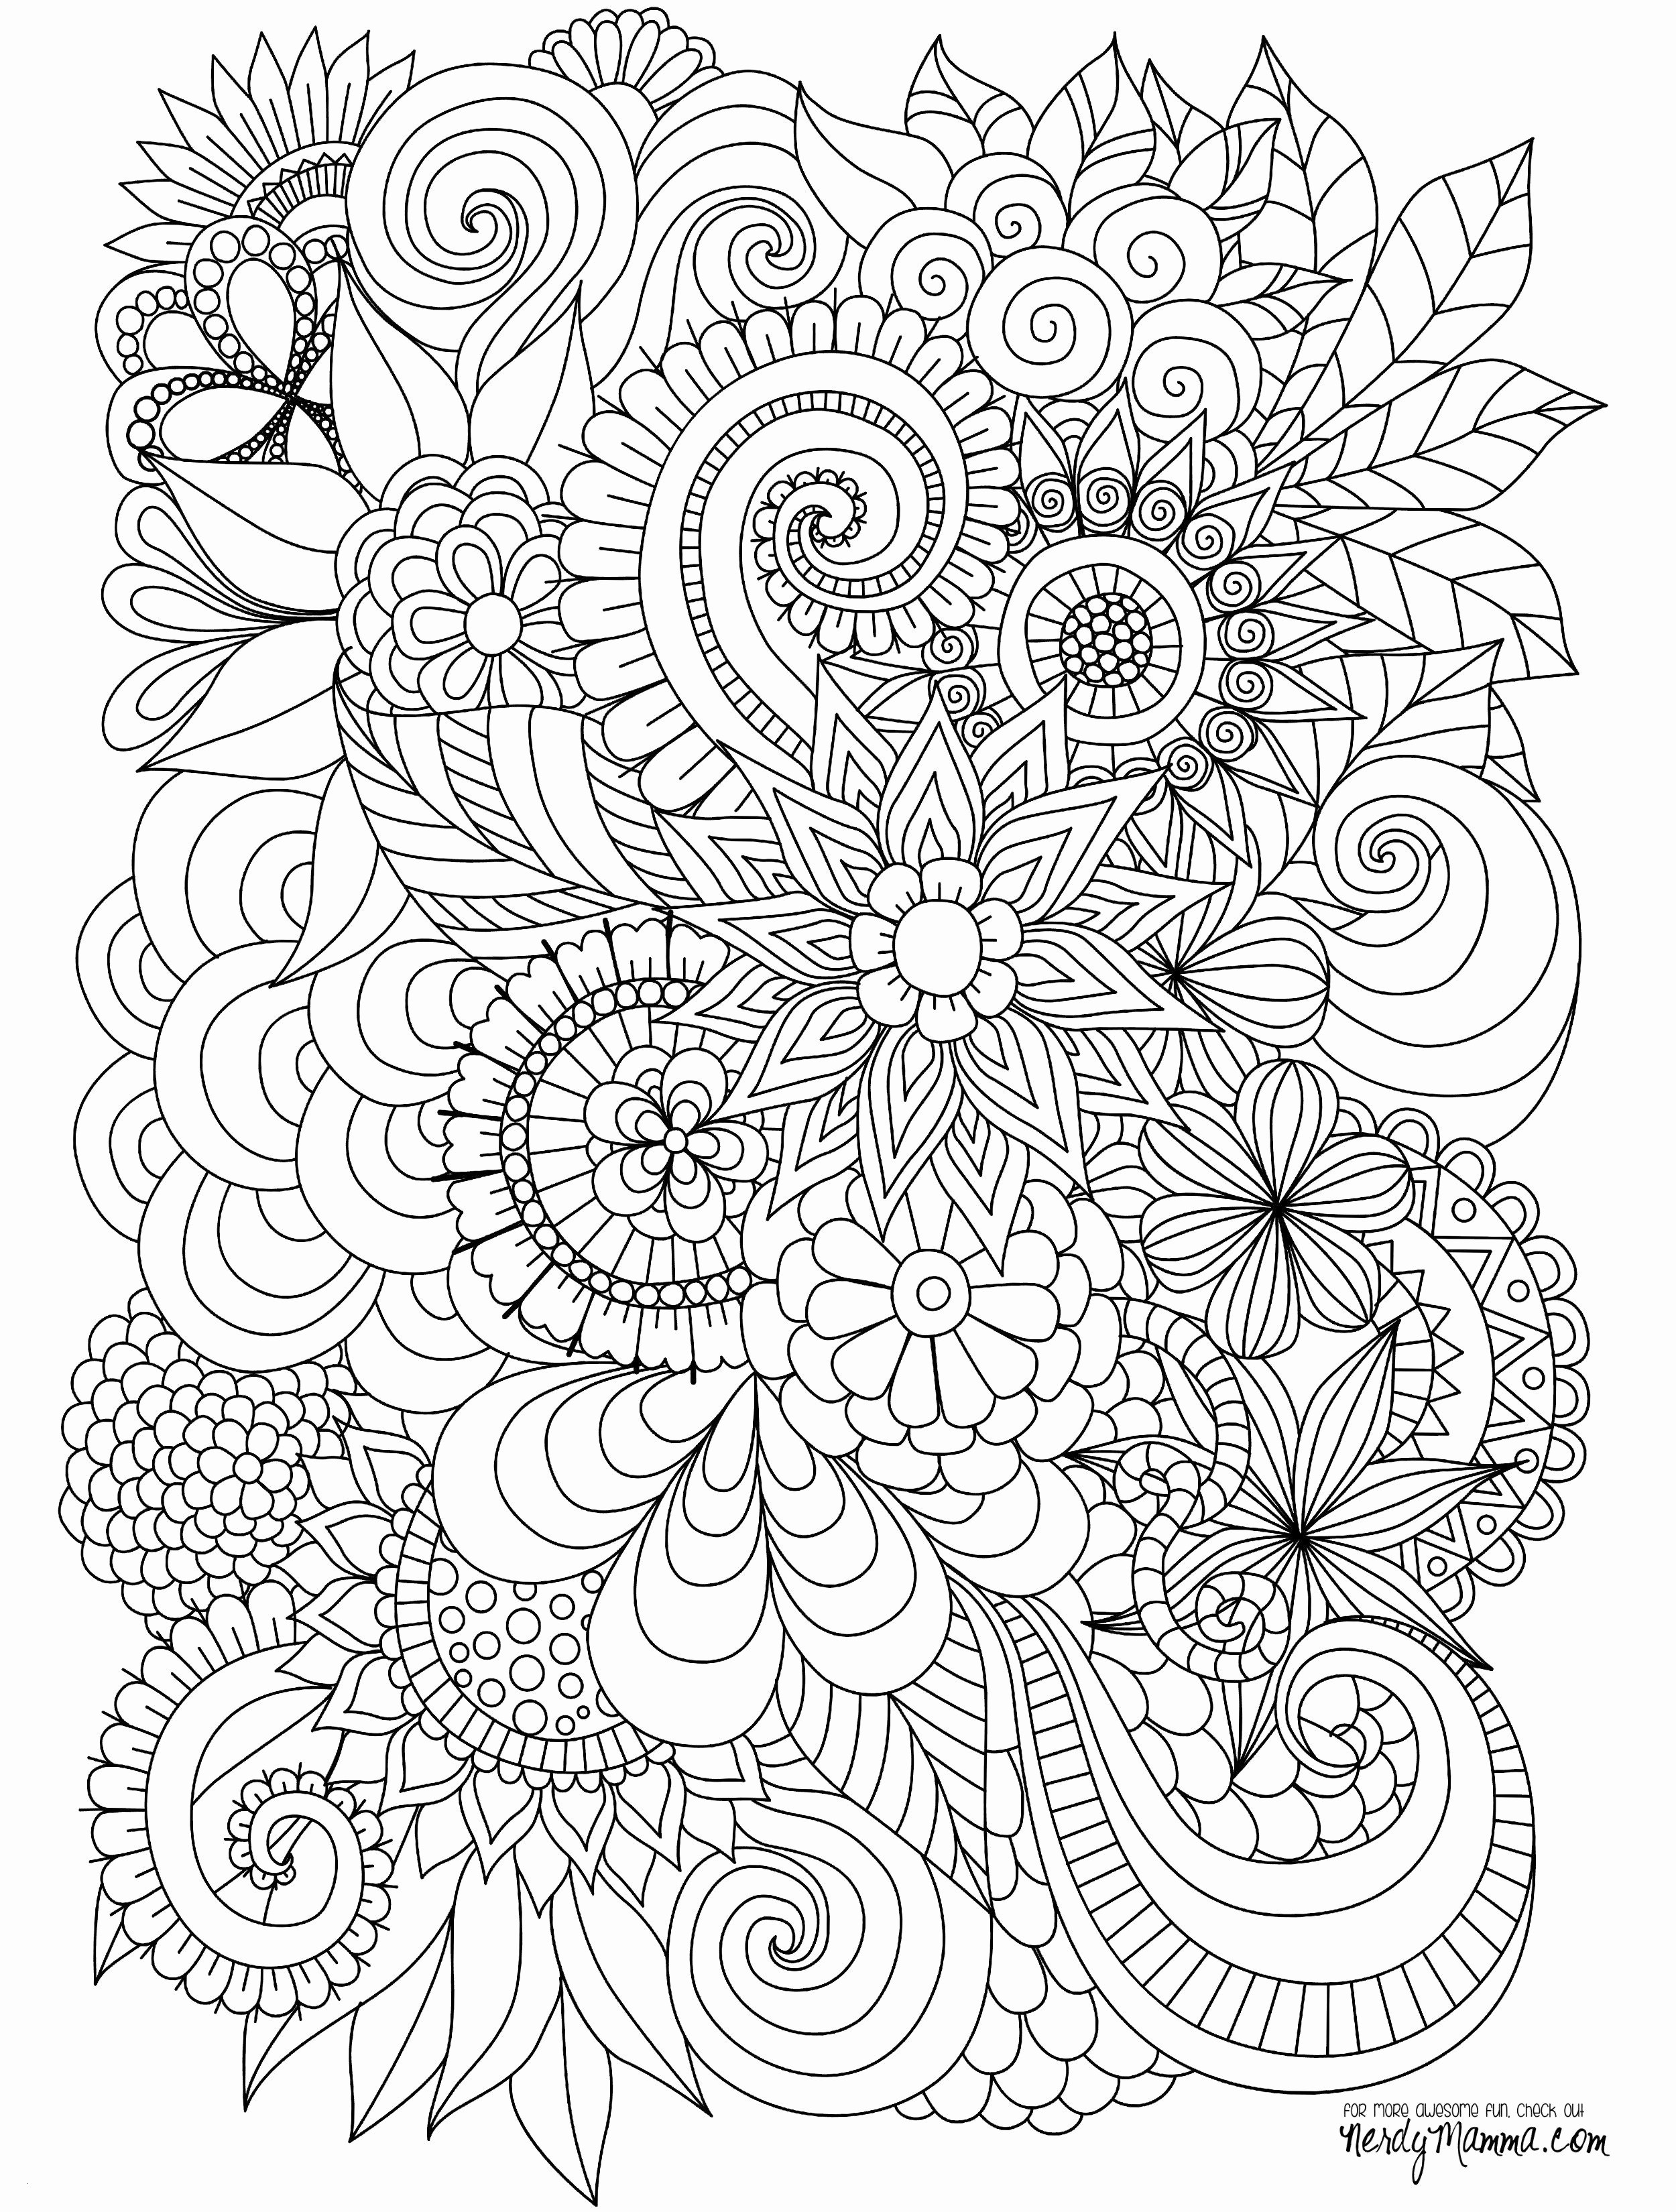 Fall Printable Coloring Pages Awesome Fresh S S Media Cache Ak0 Pinimg originals 0d B4 2c Free